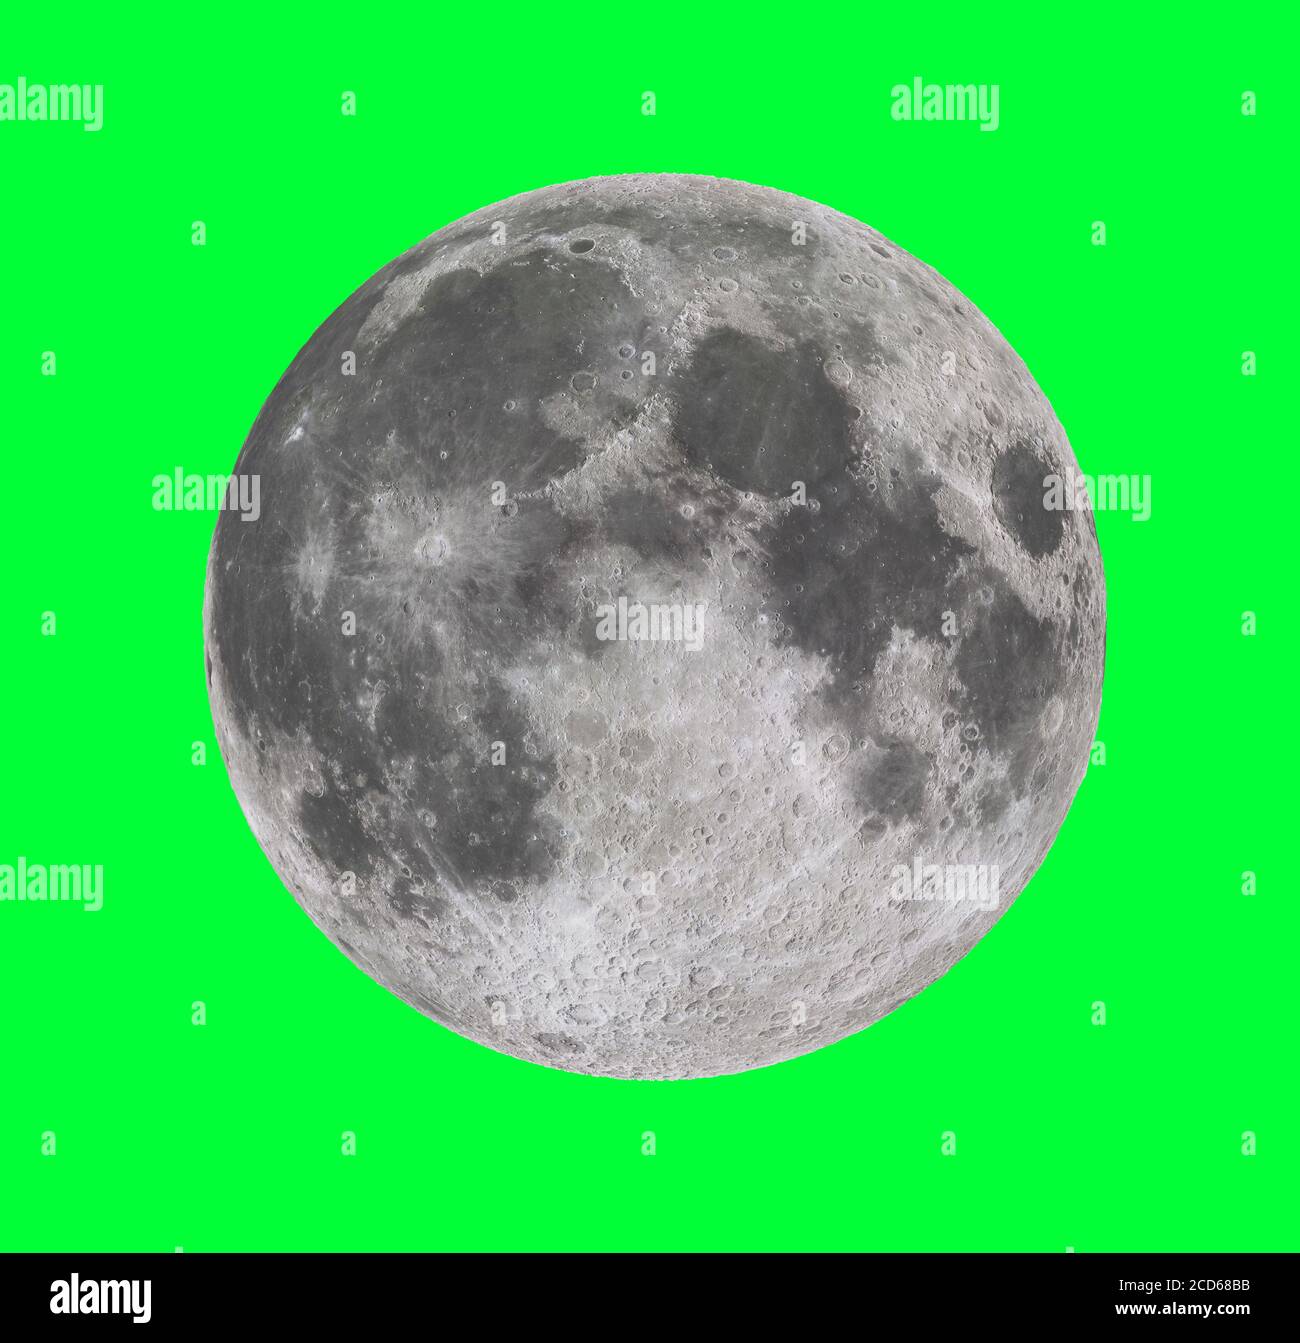 Full moon extremely sharp craters high relief on a green screen background  3d rendering Stock Photo - Alamy